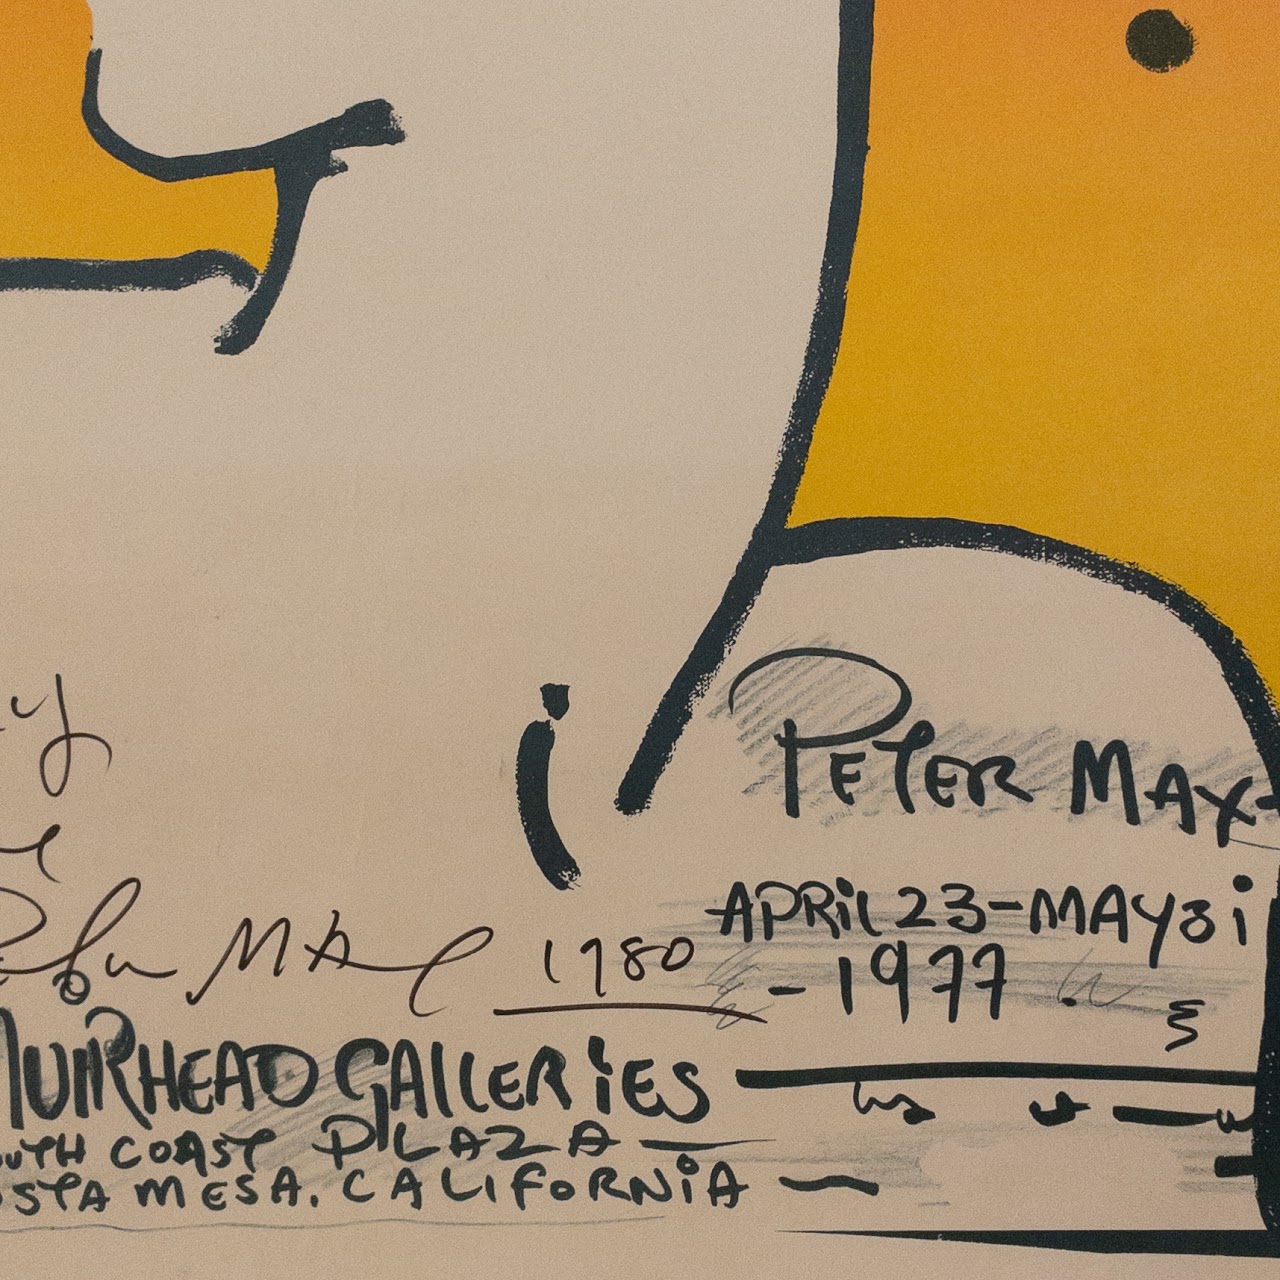 Peter Max Muirhead Galleries Show Signed Poster